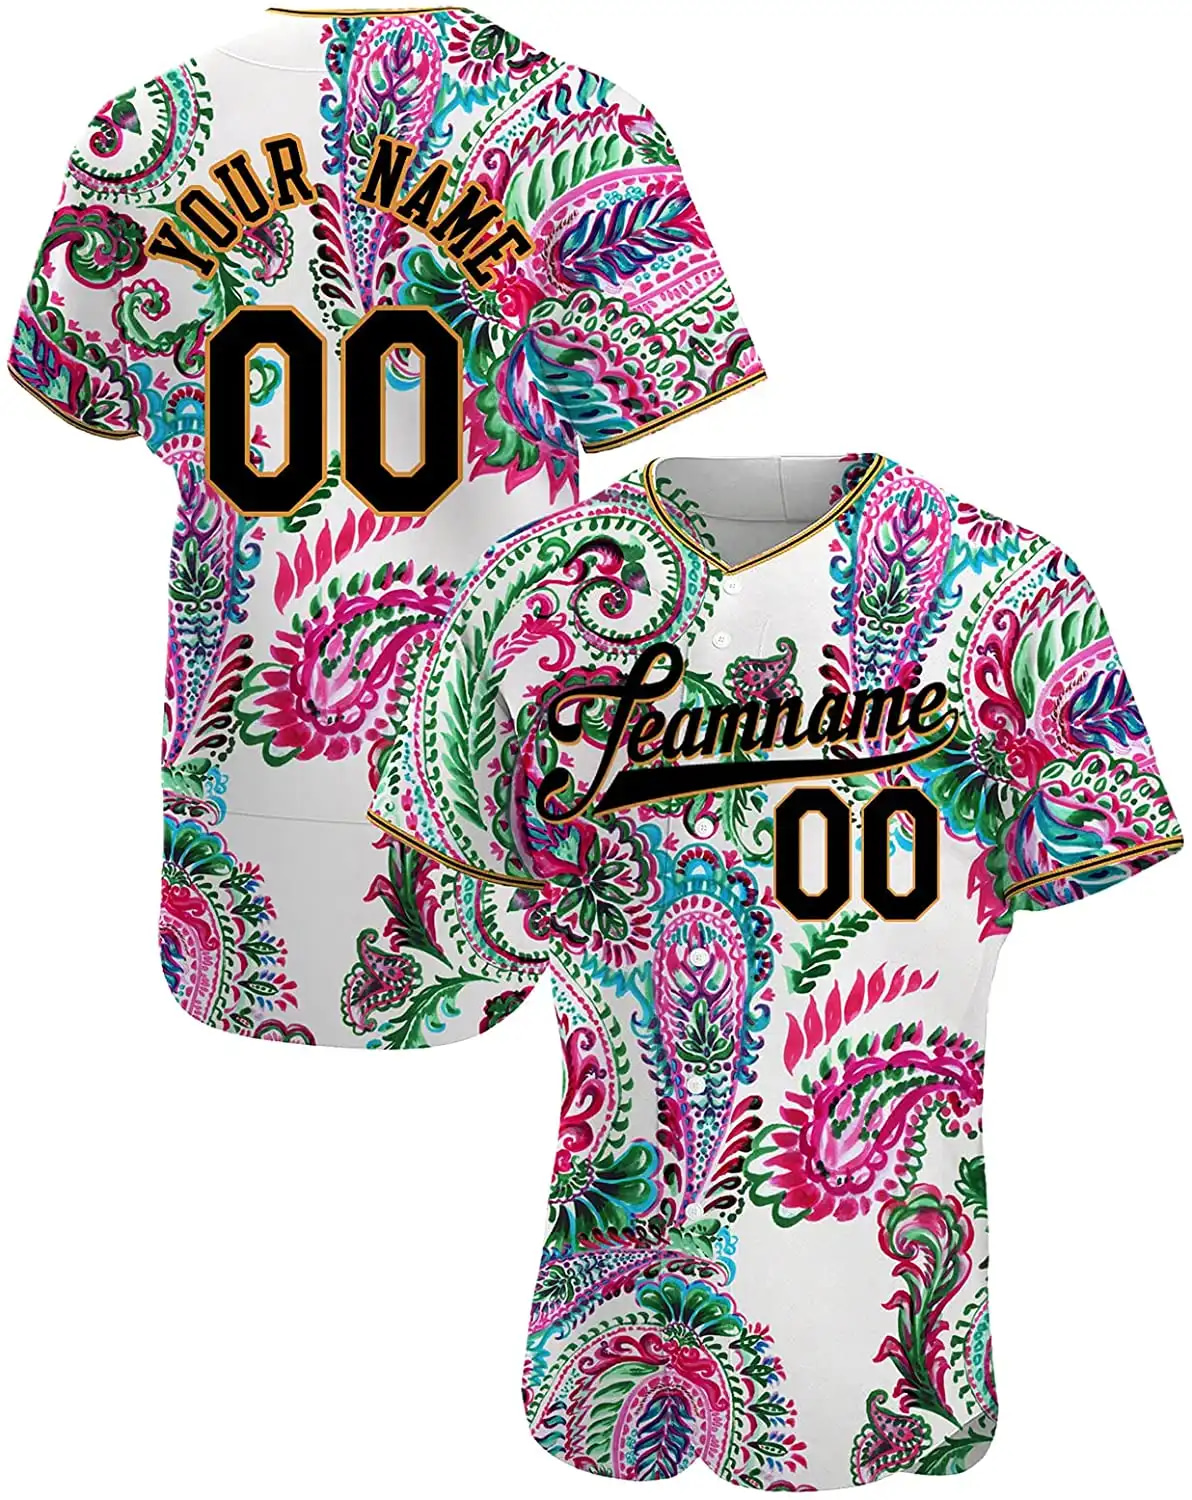 Personalized Pattern Art Printed Name And Number Idea Gift For Fans Baseball Jersey